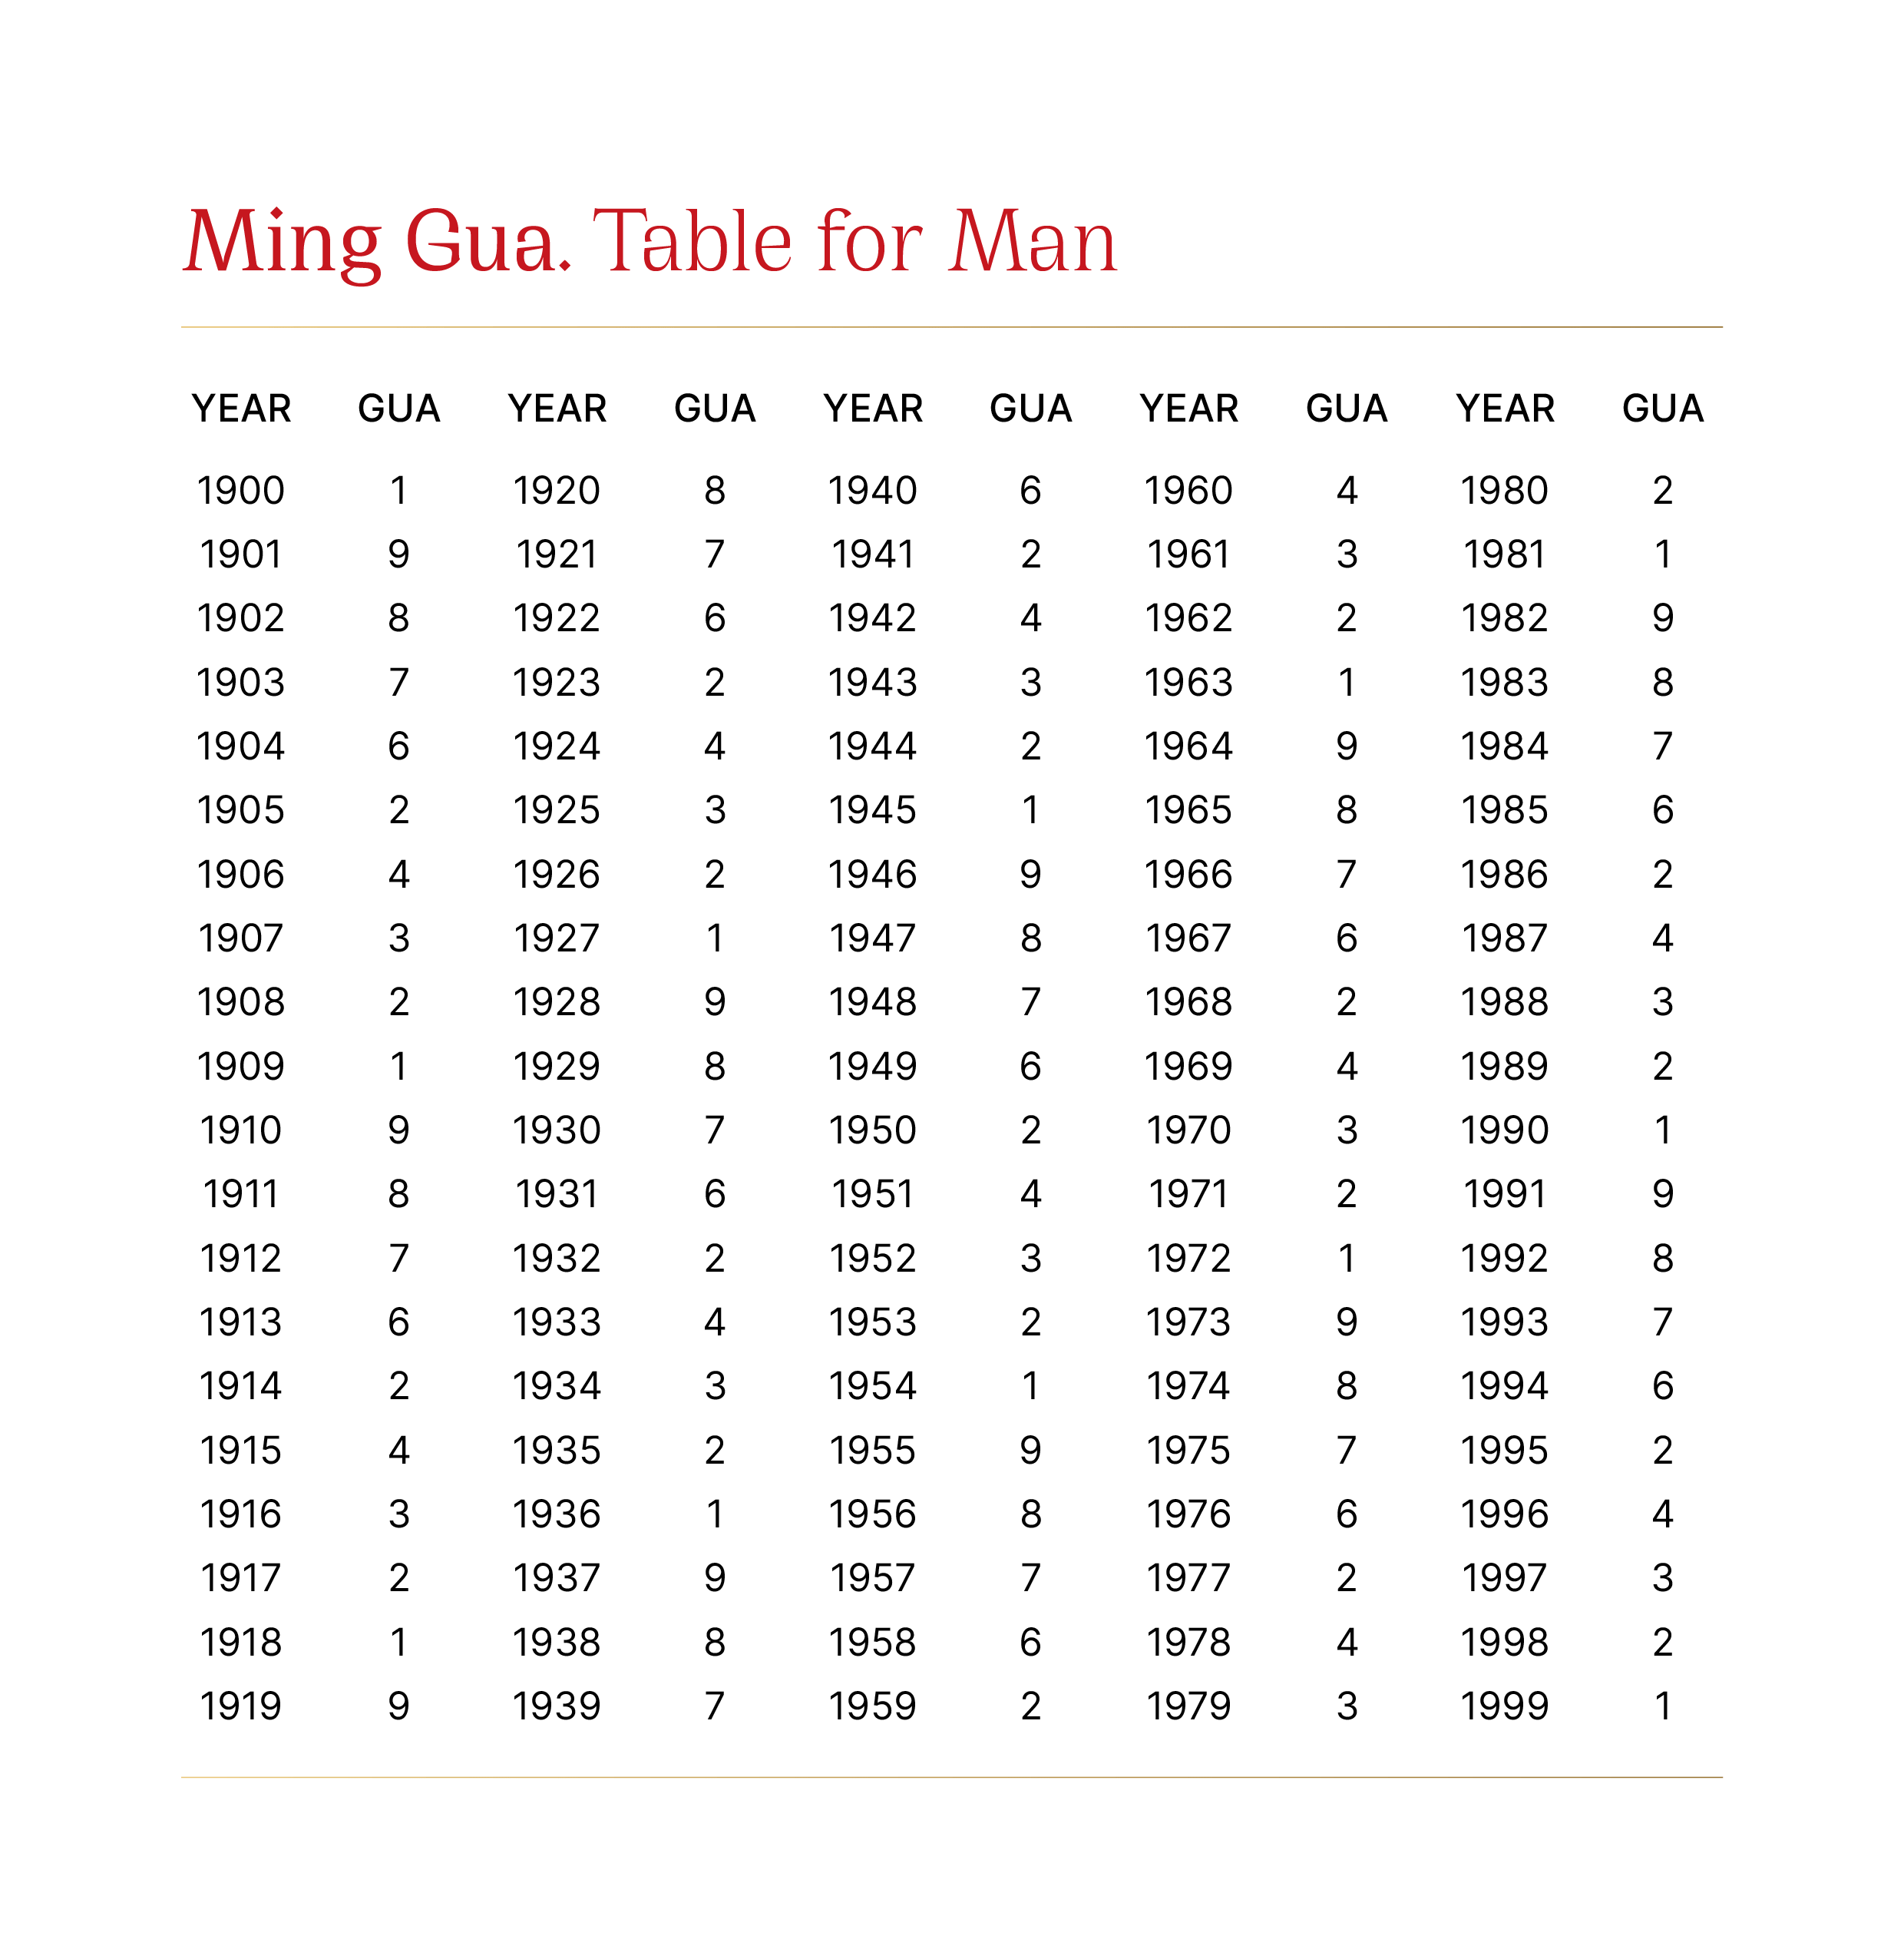 Ming-Gua-Table-for-man